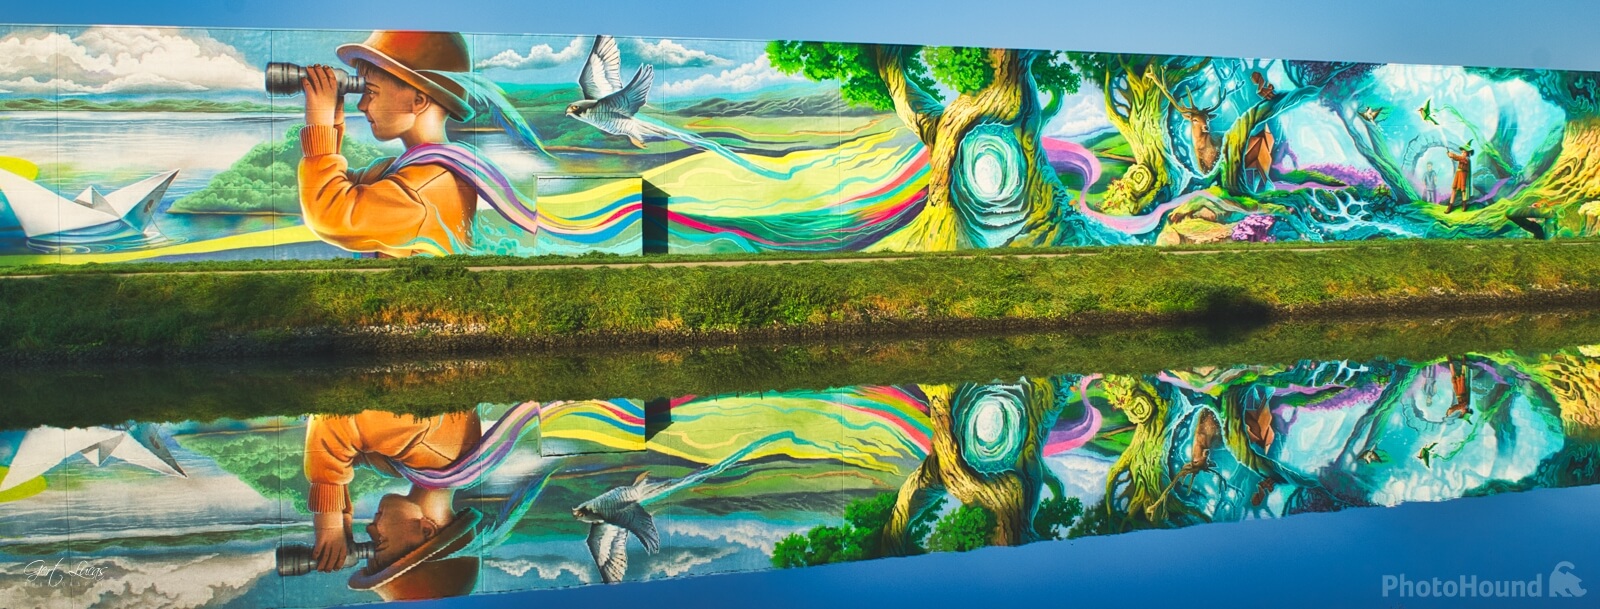 Image of Pacapime Mural by Gert Lucas